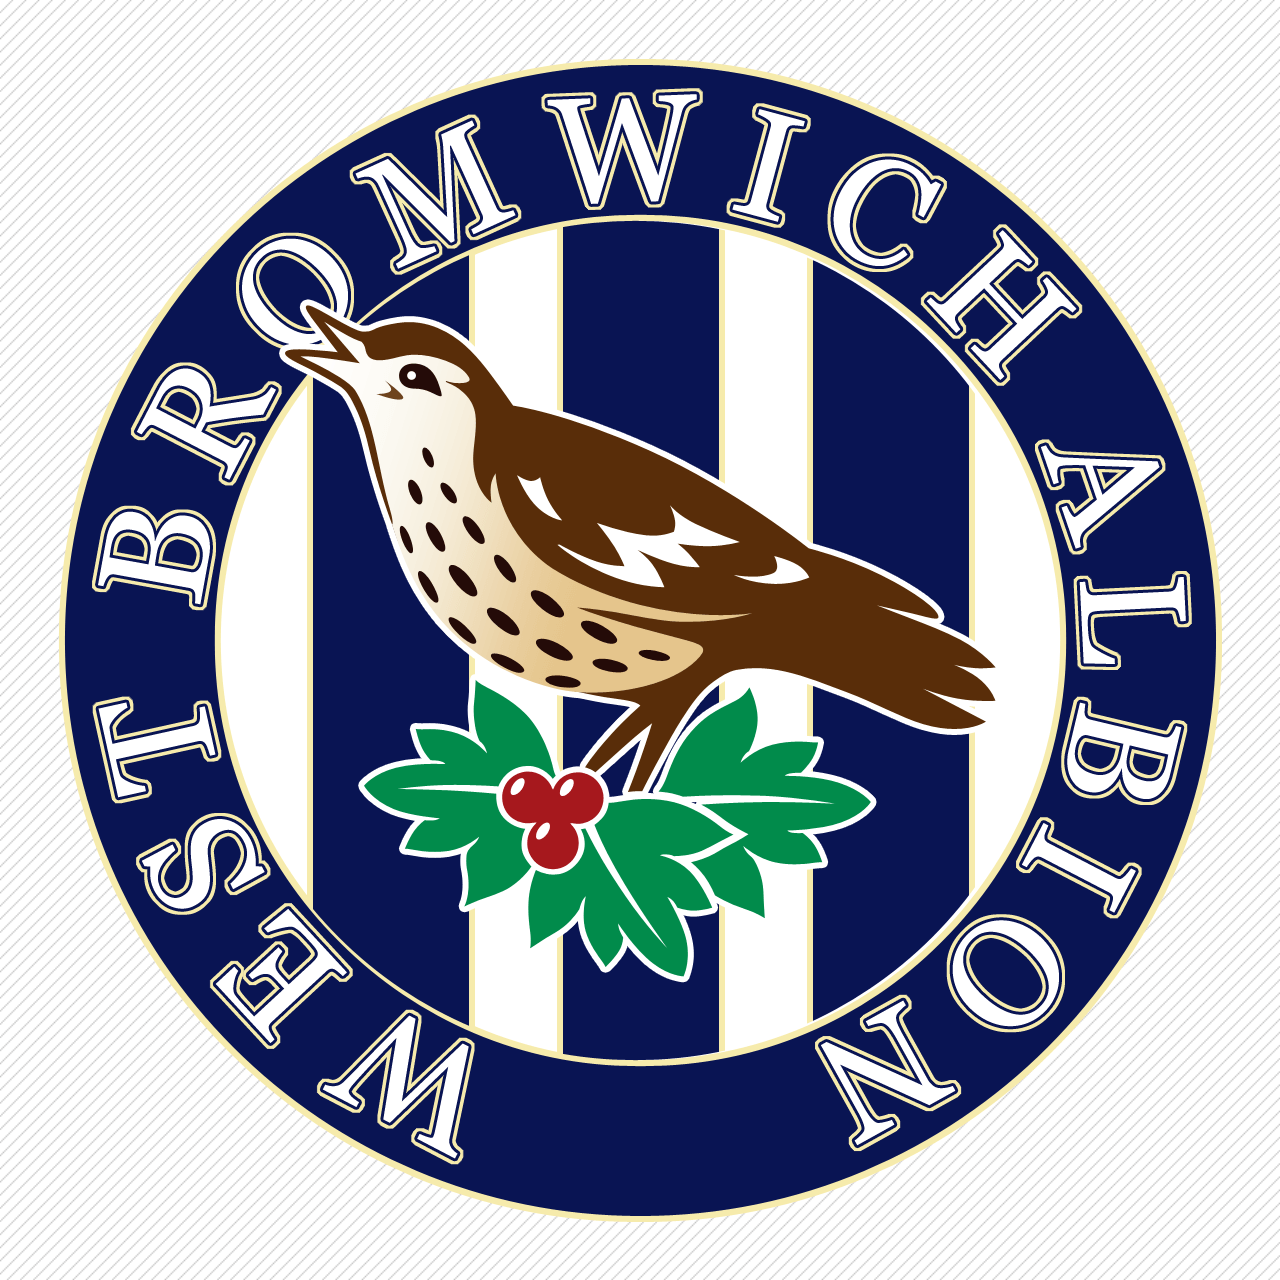 West Brom Logo - West Bromwich Albion (old logo) | SBC -West Bromwich Albion FC ...